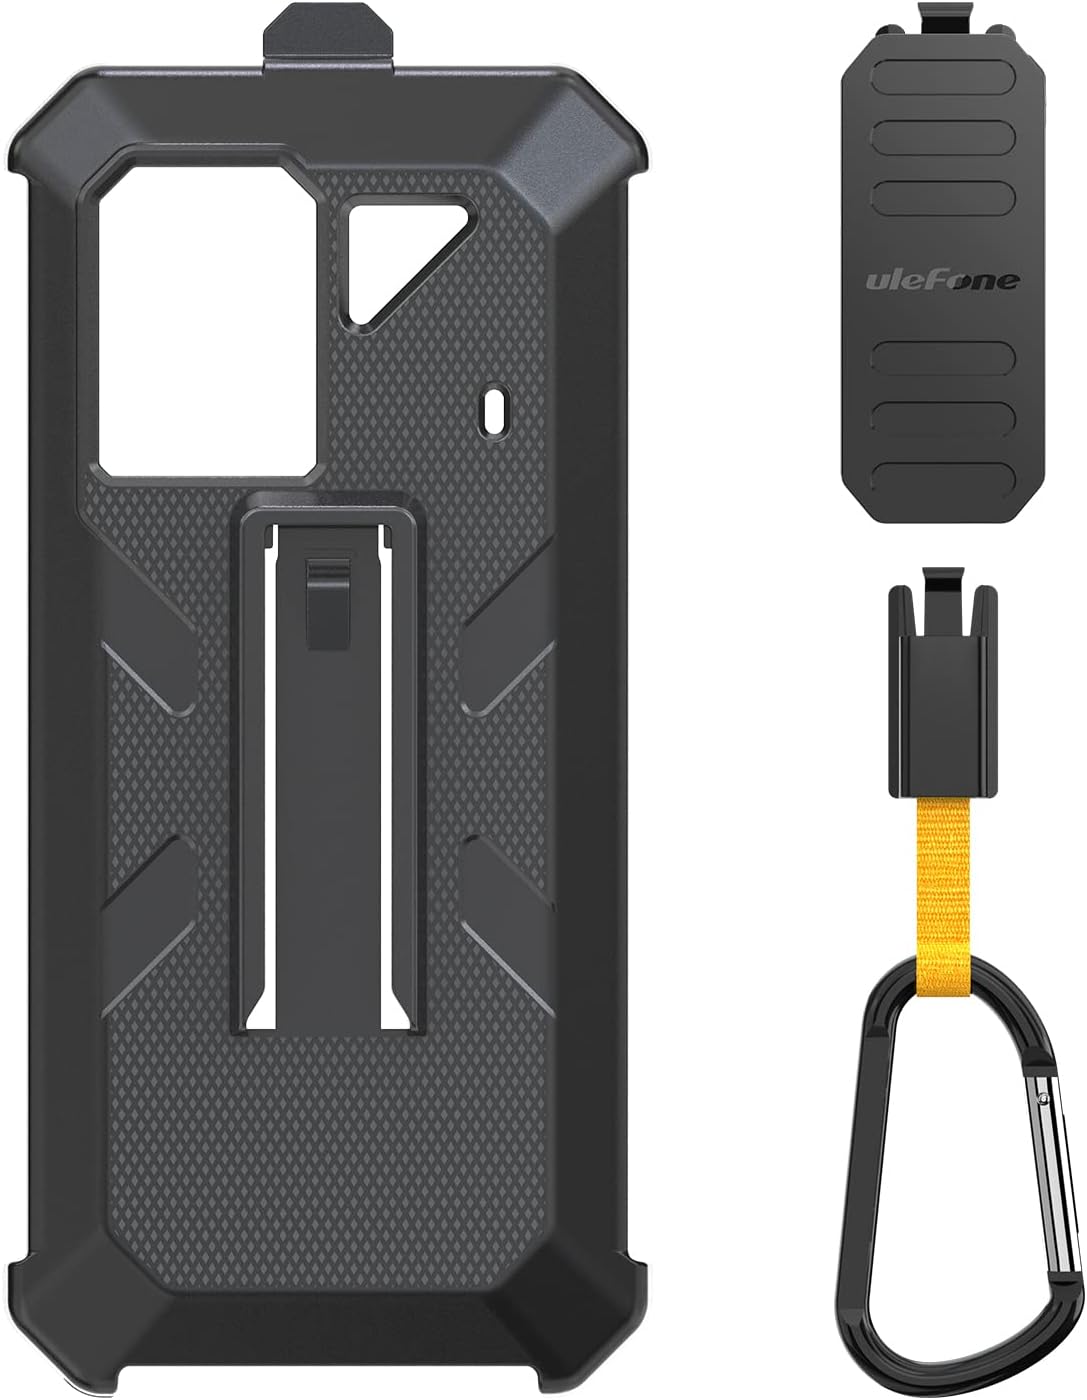 Ulefone Multifunctional Protective Shockproof Case for Power Armor 18 18T 19 19T Rugged Smartphone with Back Clip Carabiner Full Protection Soft TPU Matte Silicone Scratch Resistant Anti-Fall Black